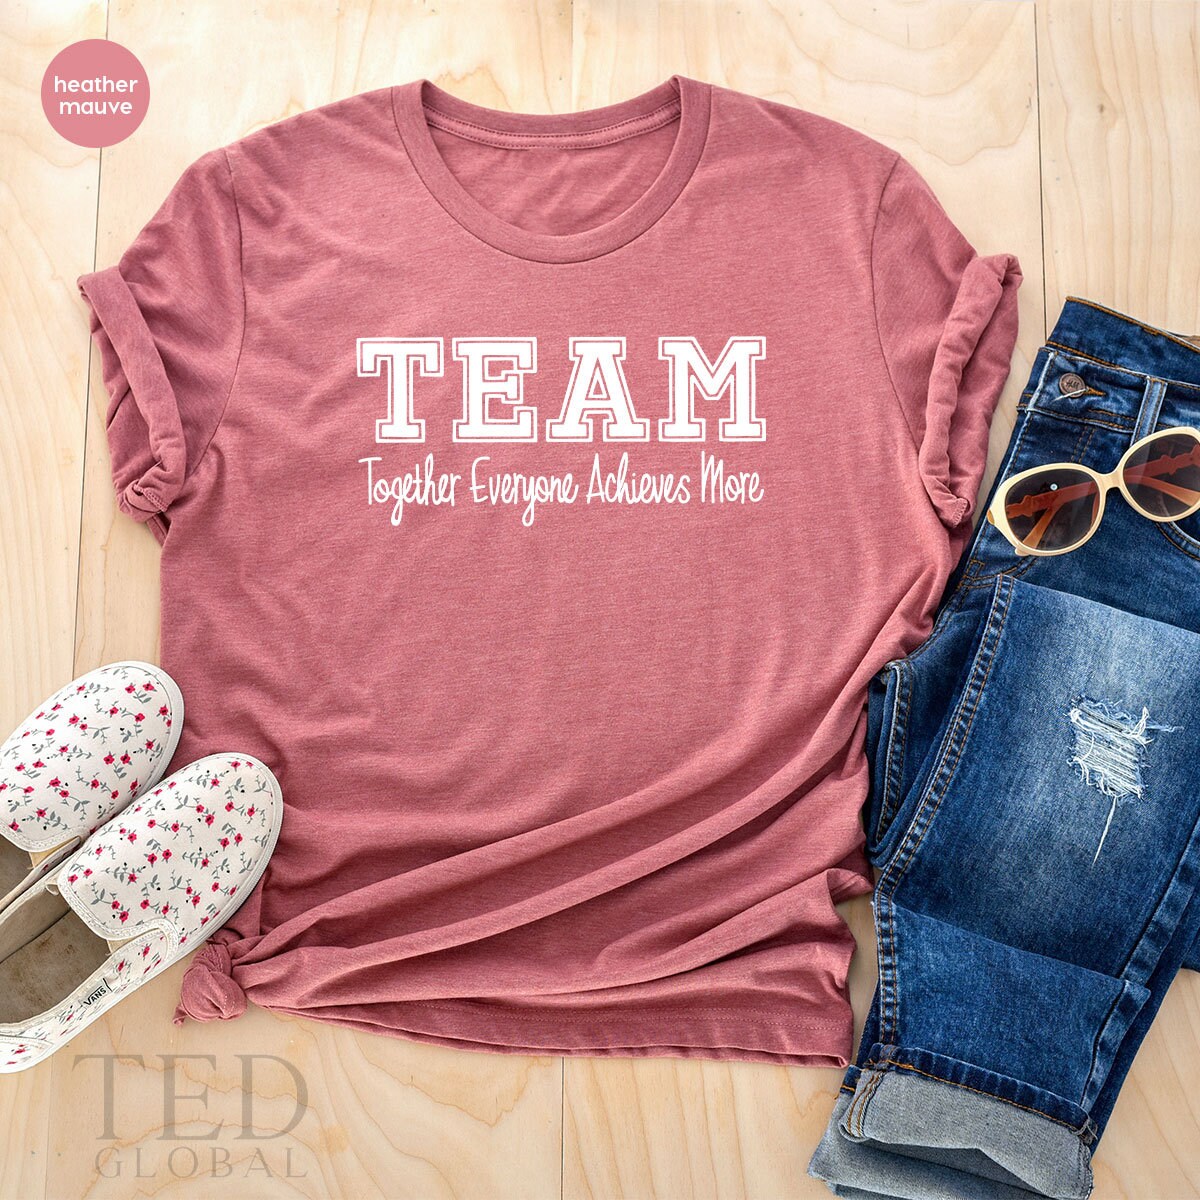 Team T Shirt, Teamwork TShirt, Custom Team Shirts, Together Everyone Archives More, Sport Team Tee,Gift For Employee From Boss, Motivational - Fastdeliverytees.com